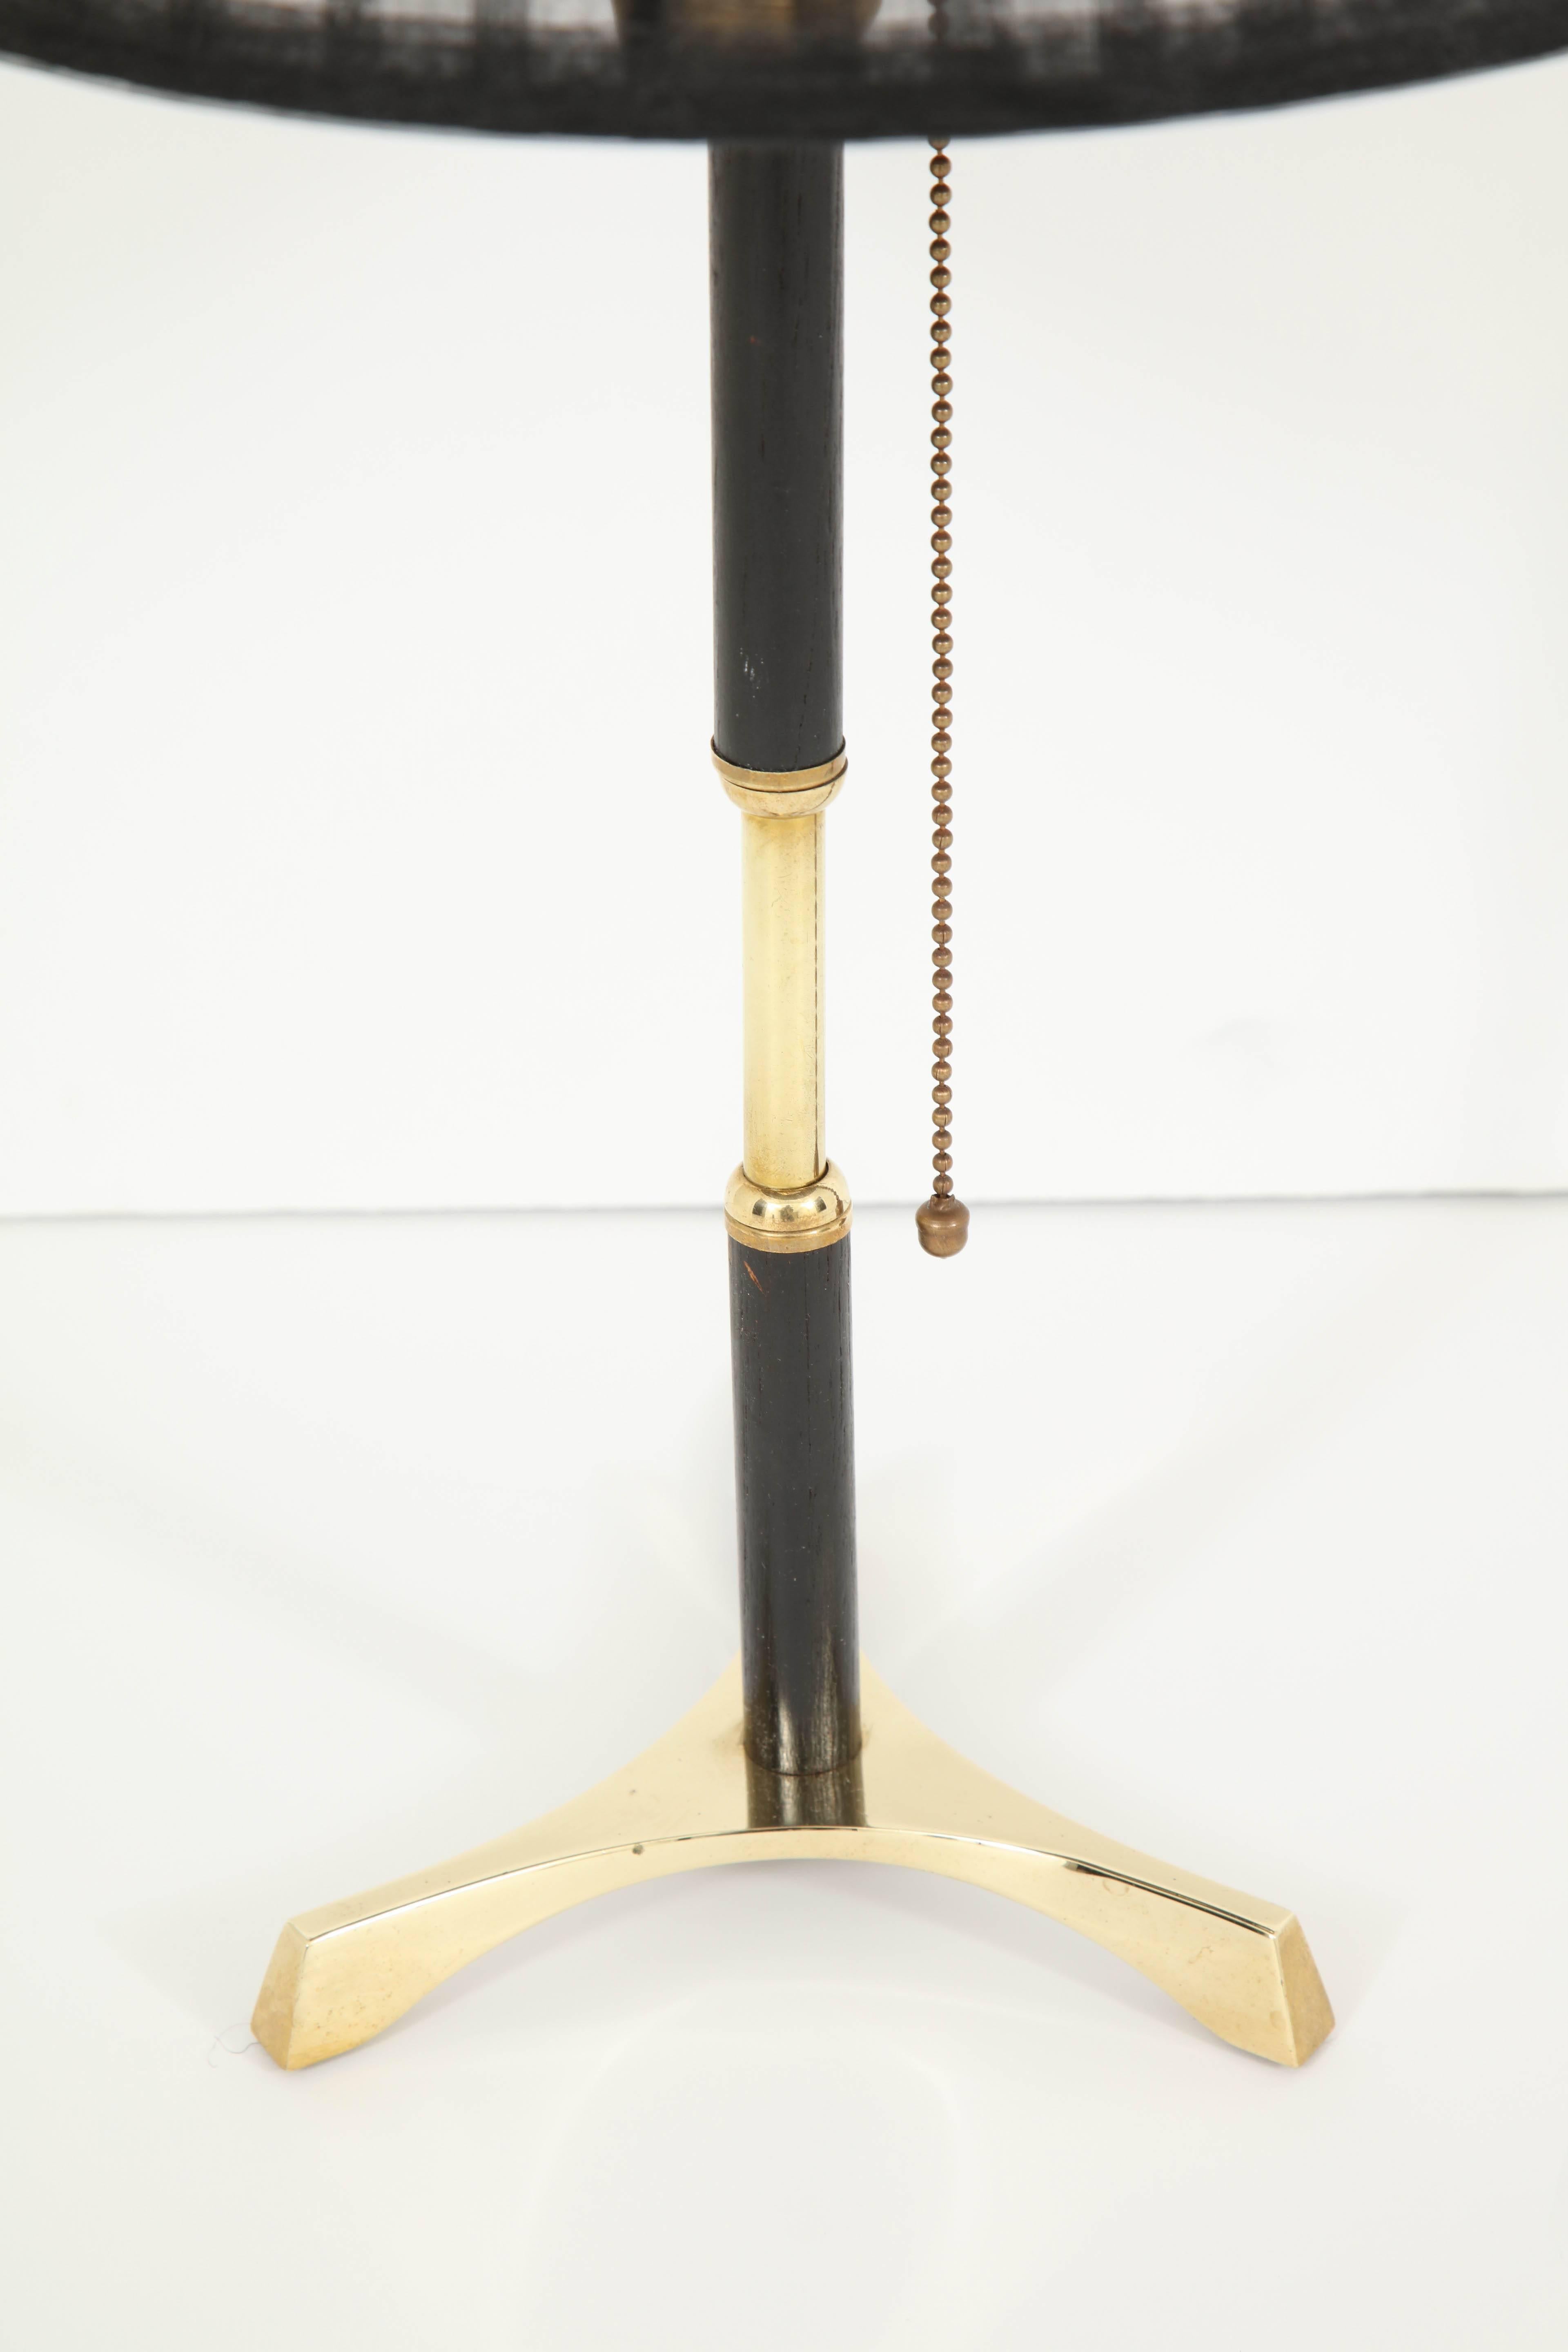 Italian Brass Table Lamp with Black Wood Details, circa 1960